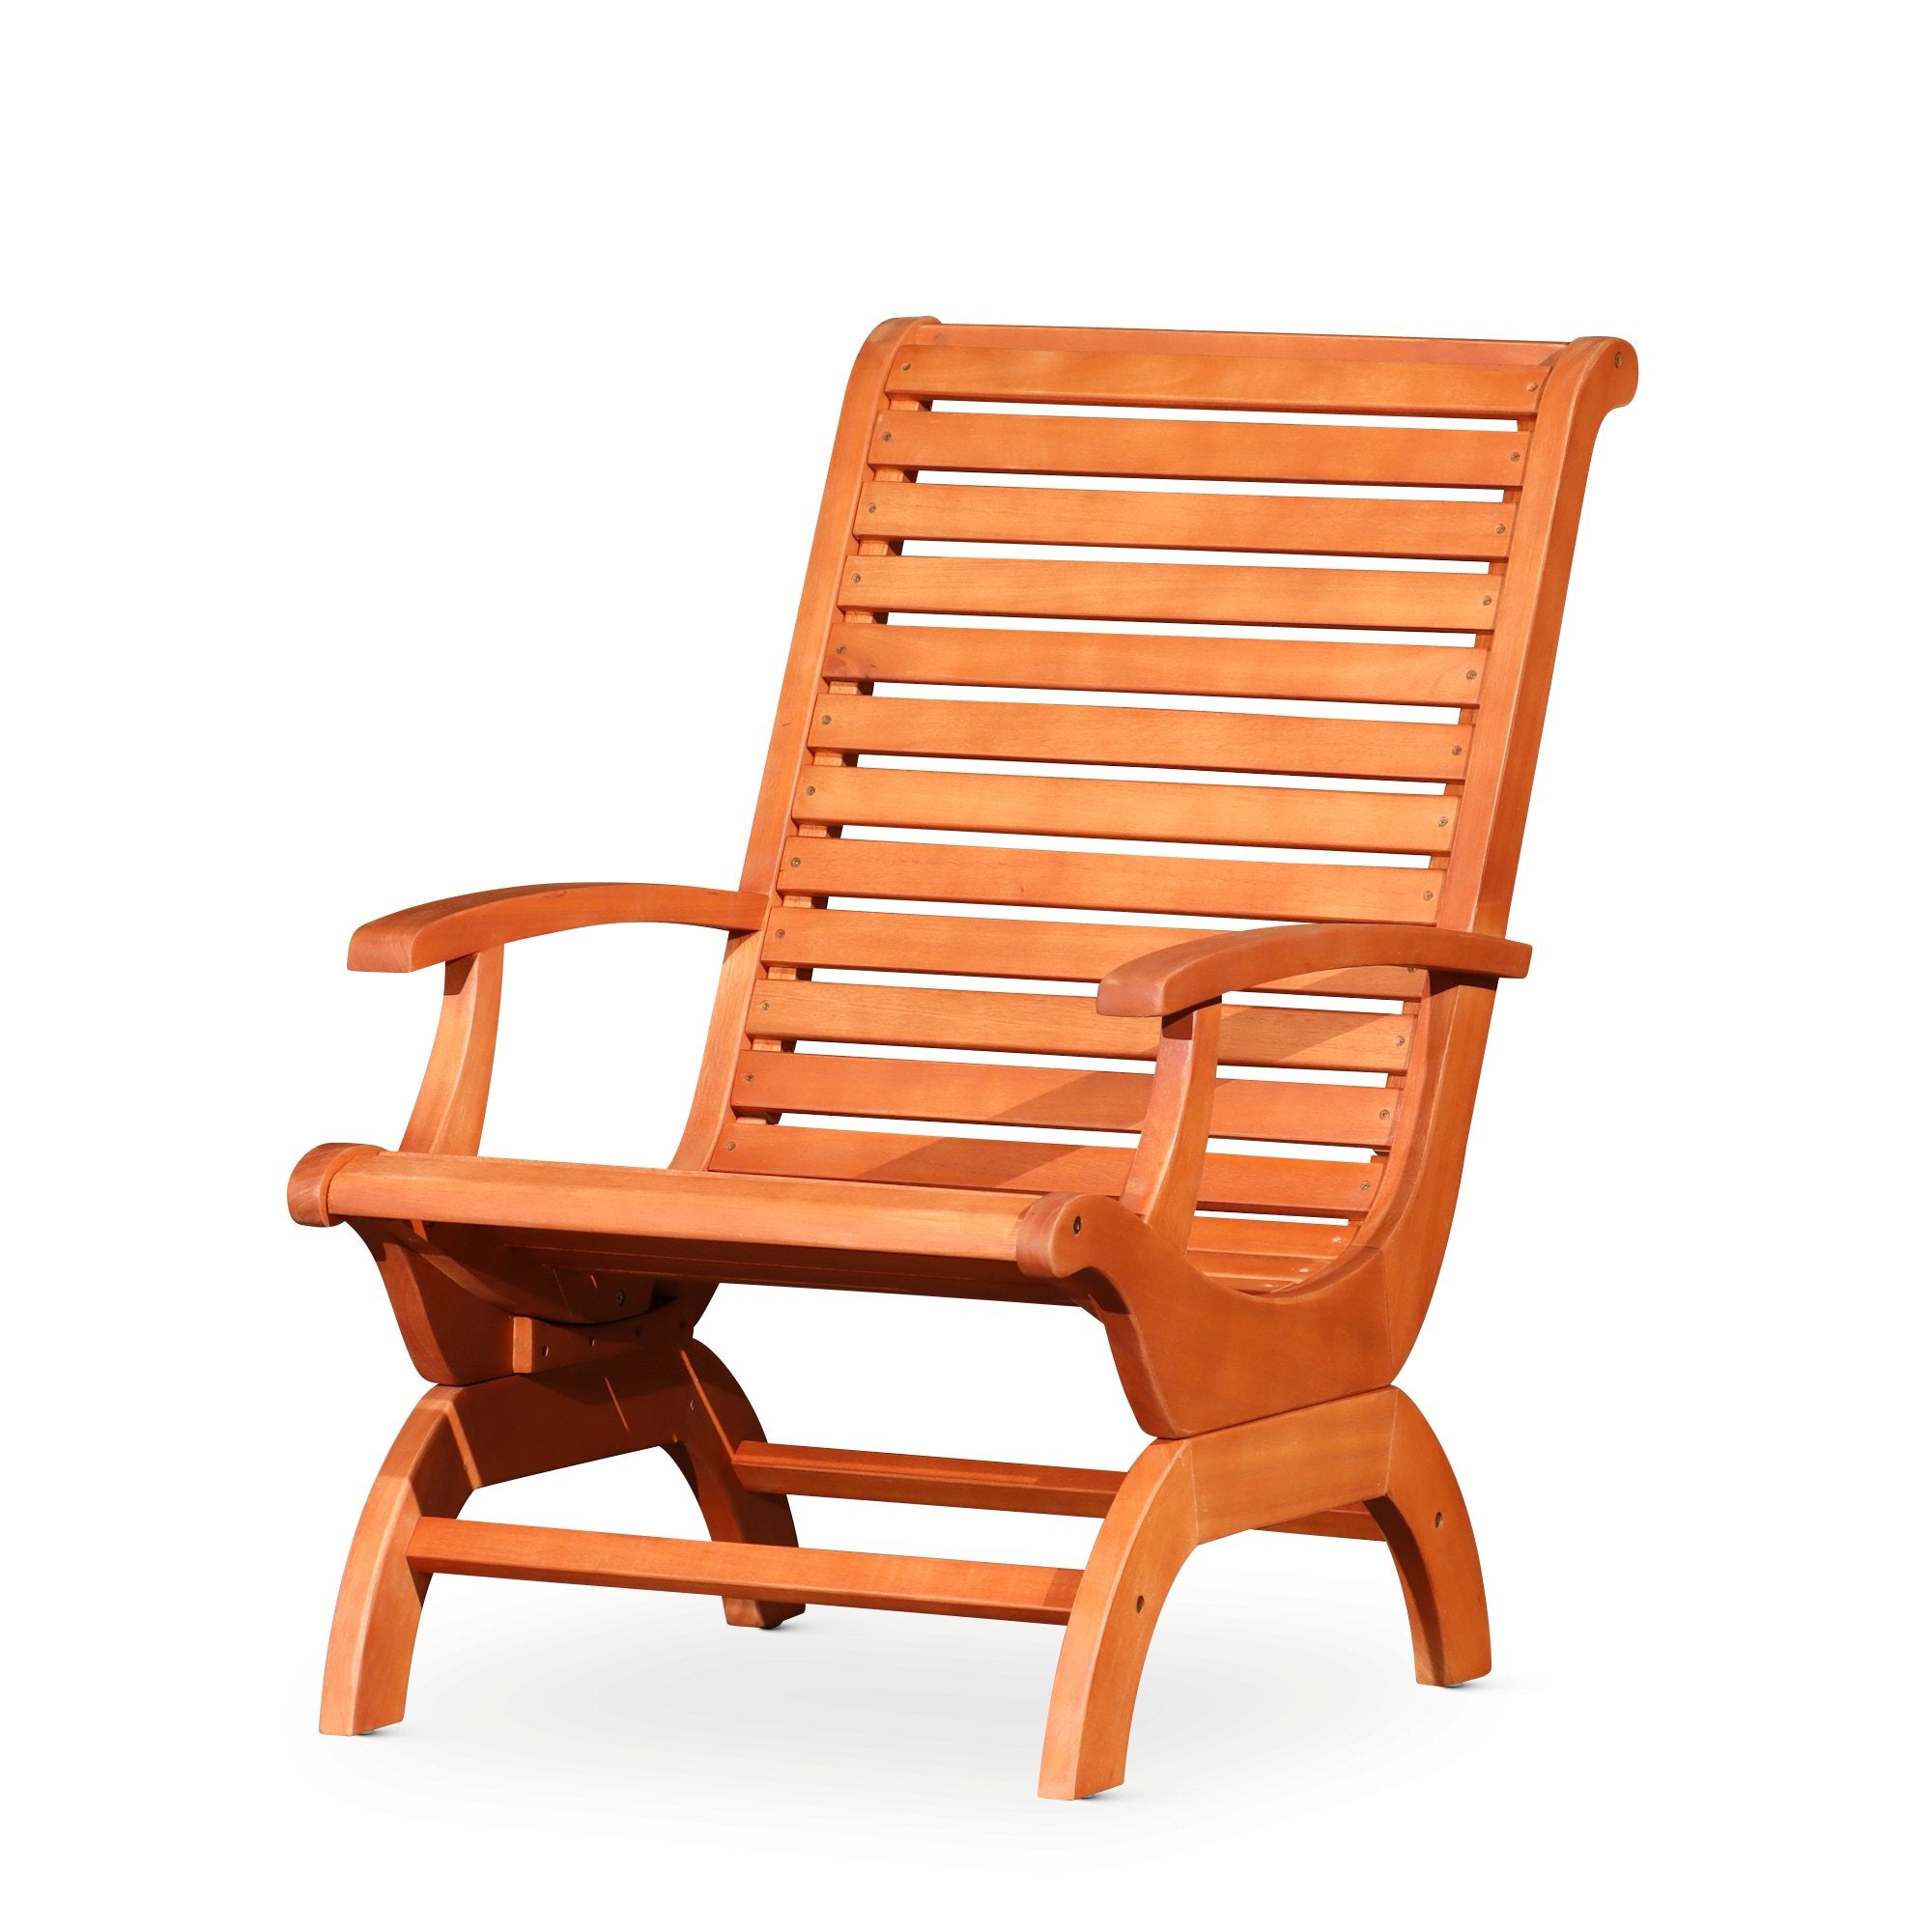 Outdoor--Plantation-Chair-Outdoor-Chairs